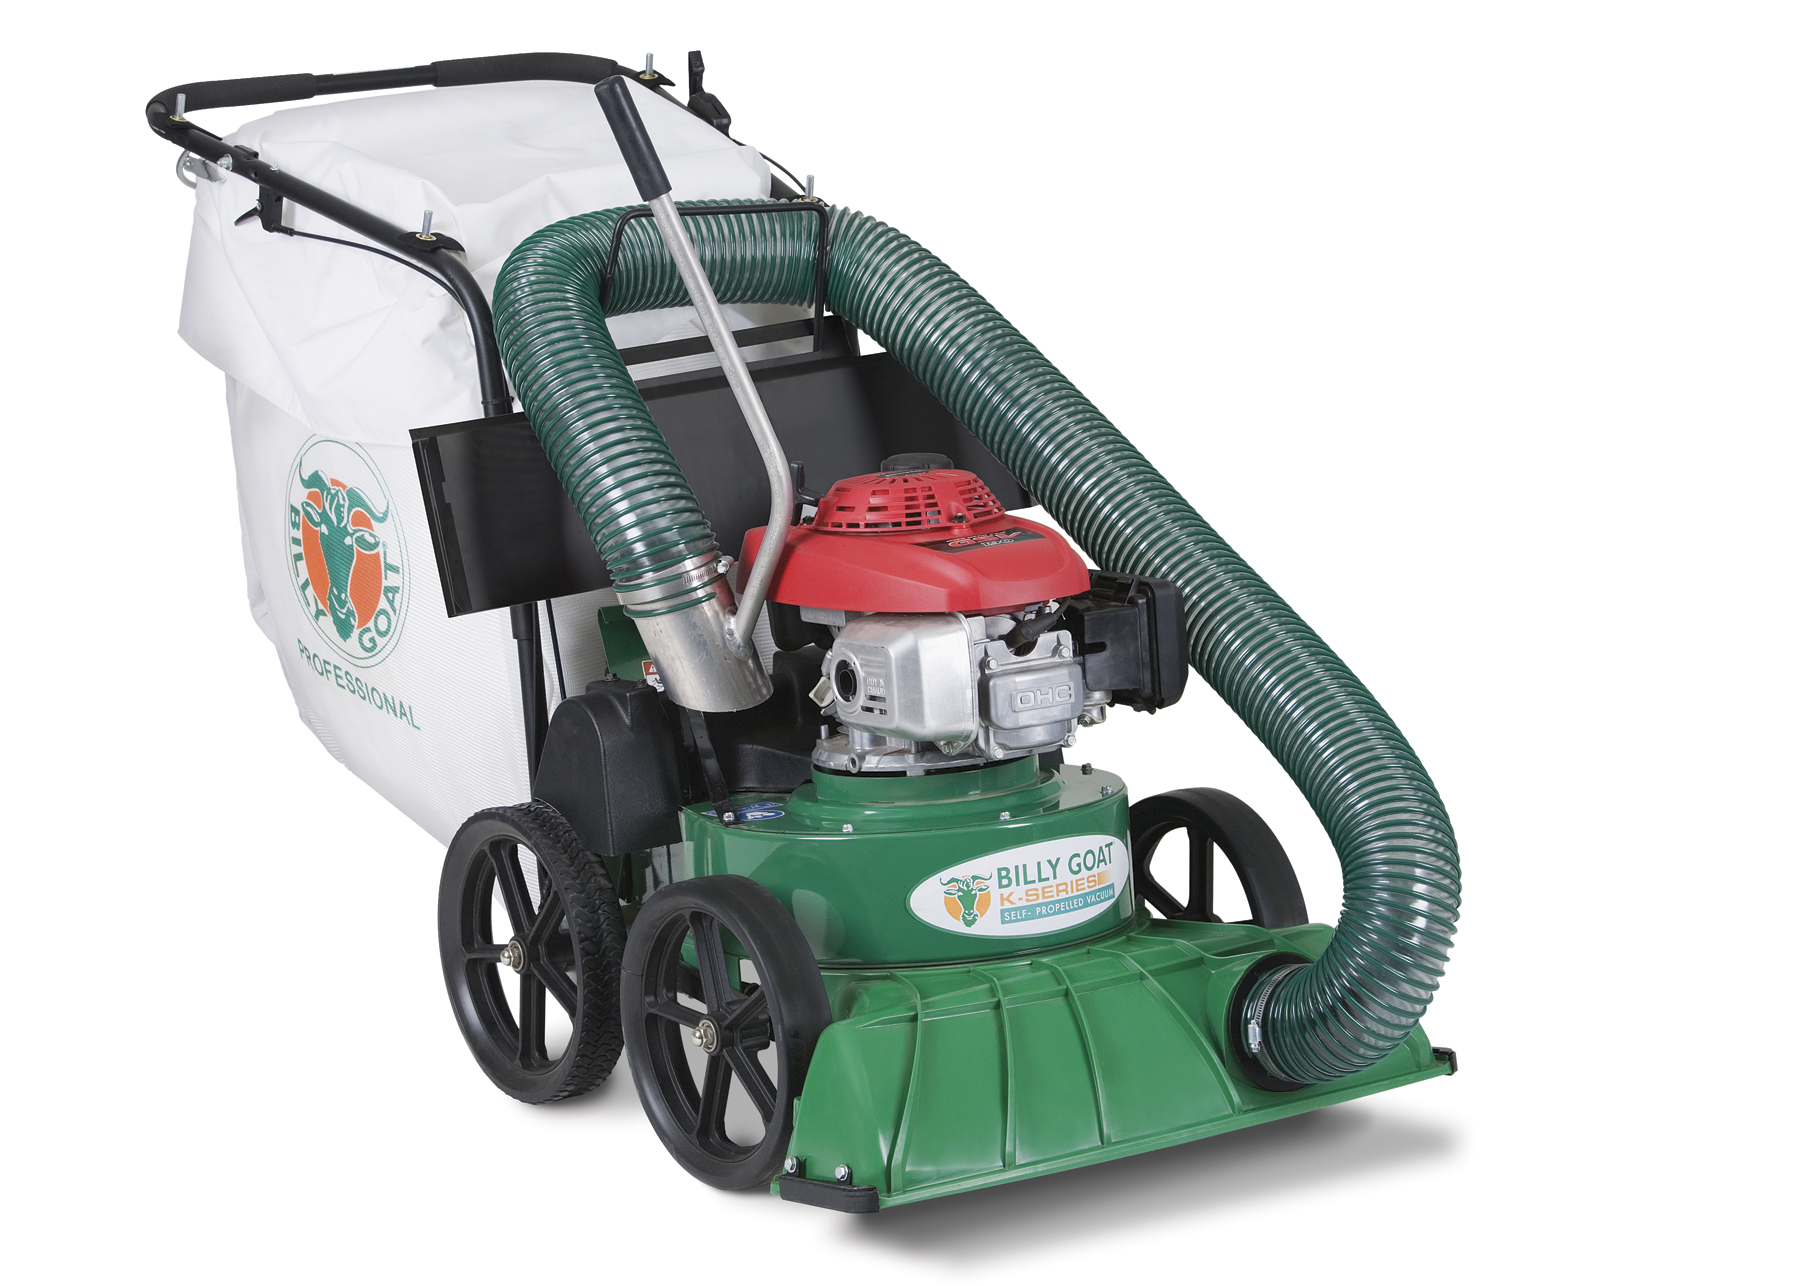 Lawn Vacuum Rental: An Essential Guide to Renting and Using a Lawn Vacuum